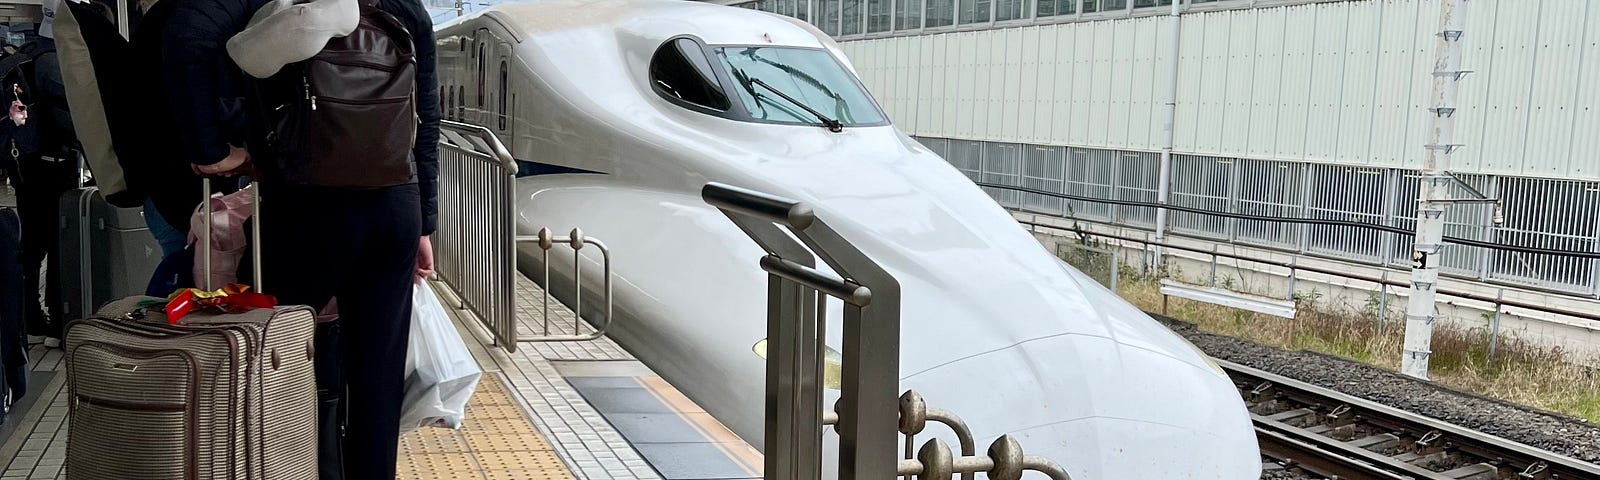 Shinkansen pulling into a station with minimal barriers.